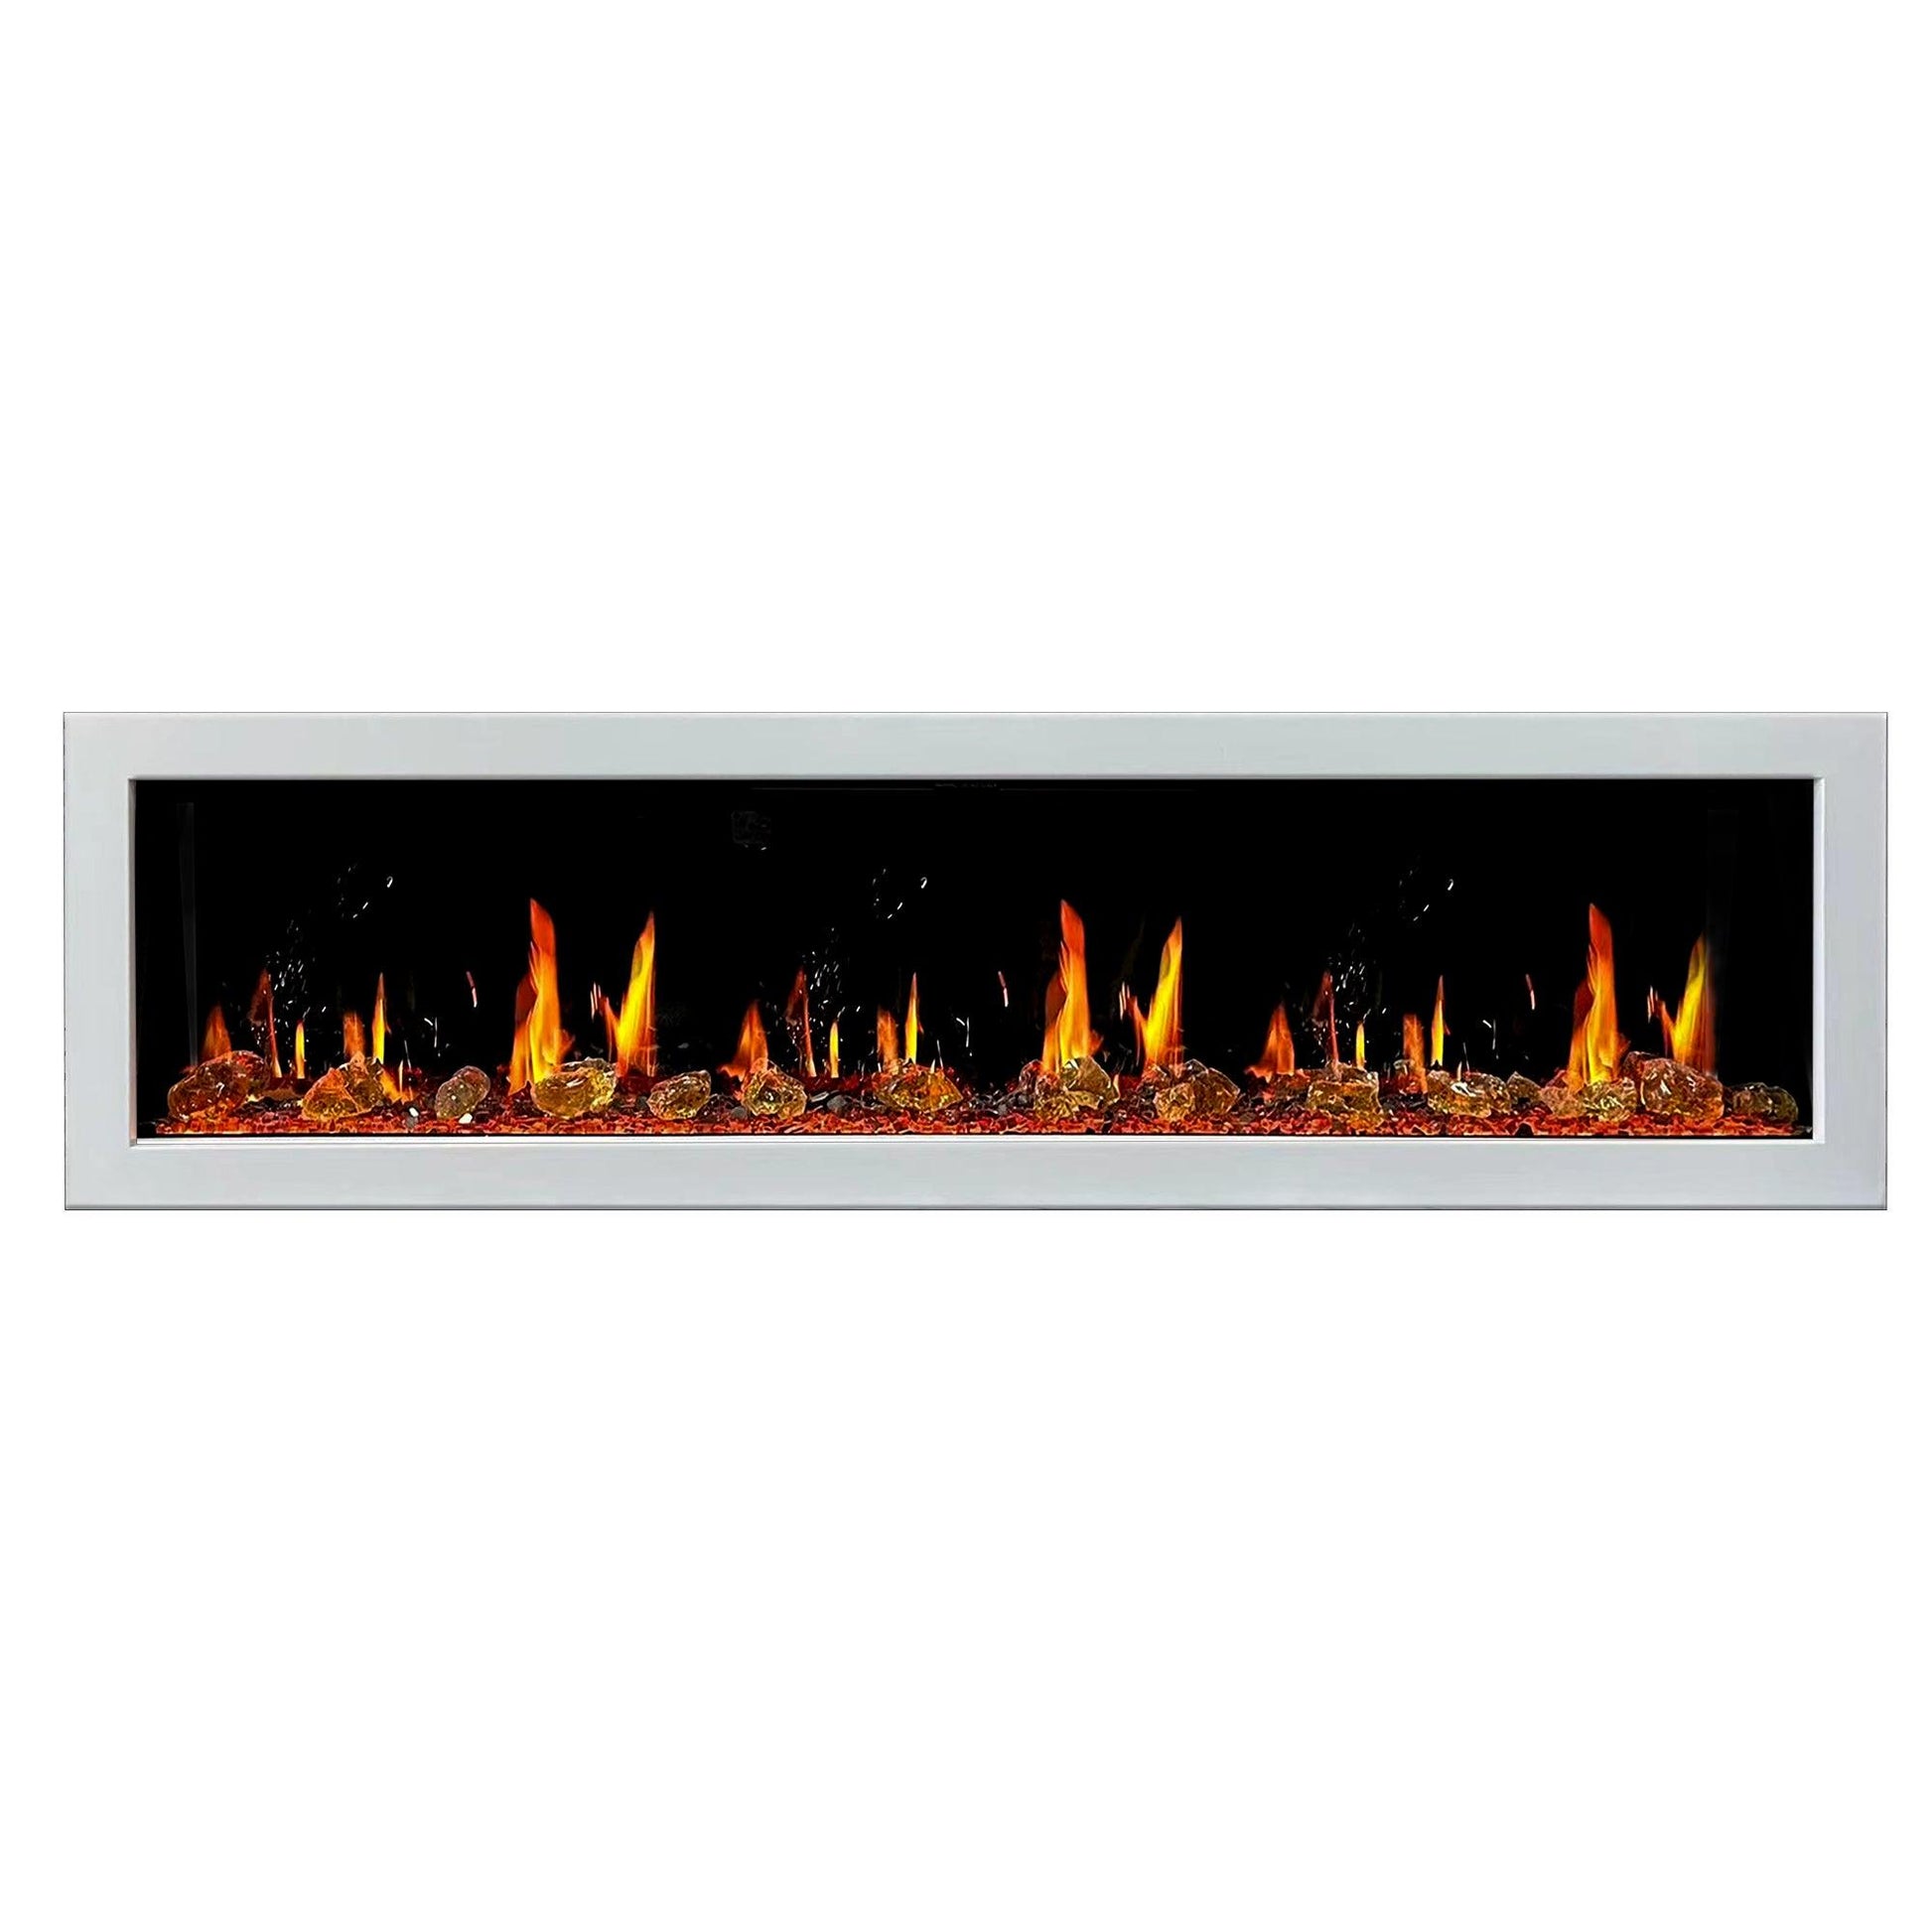 ZopaFlame™ 78" Linear Wall-mount Electric Fireplace - WG19788V - ZopaFlame Fireplaces